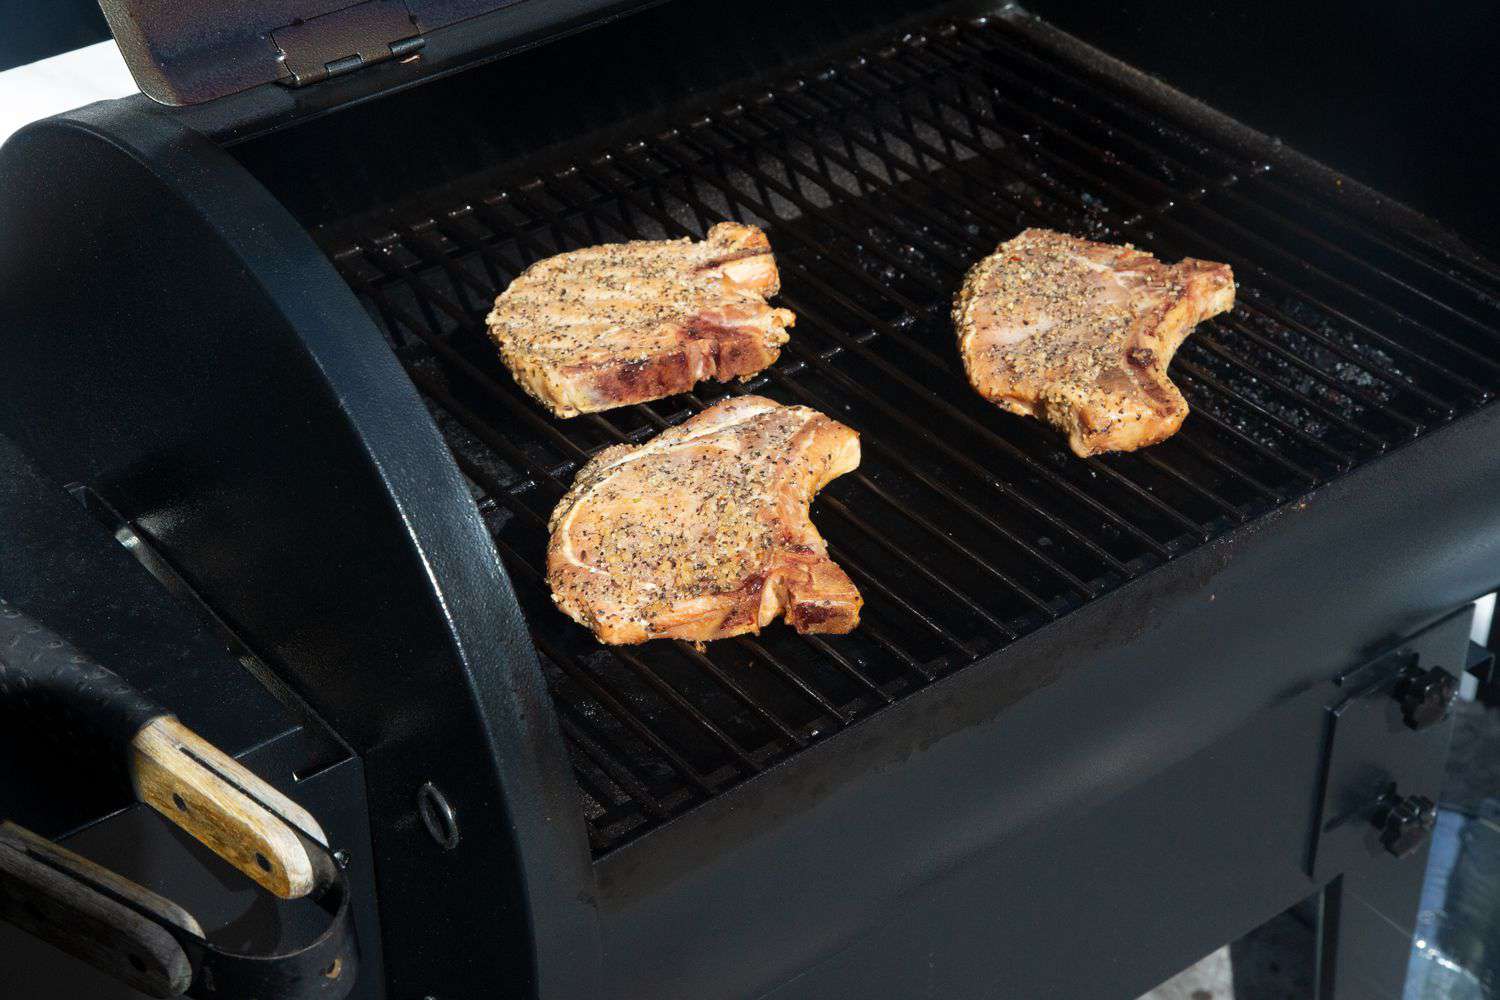 Traeger Tailgater Pellet Grill with pork chops cooking